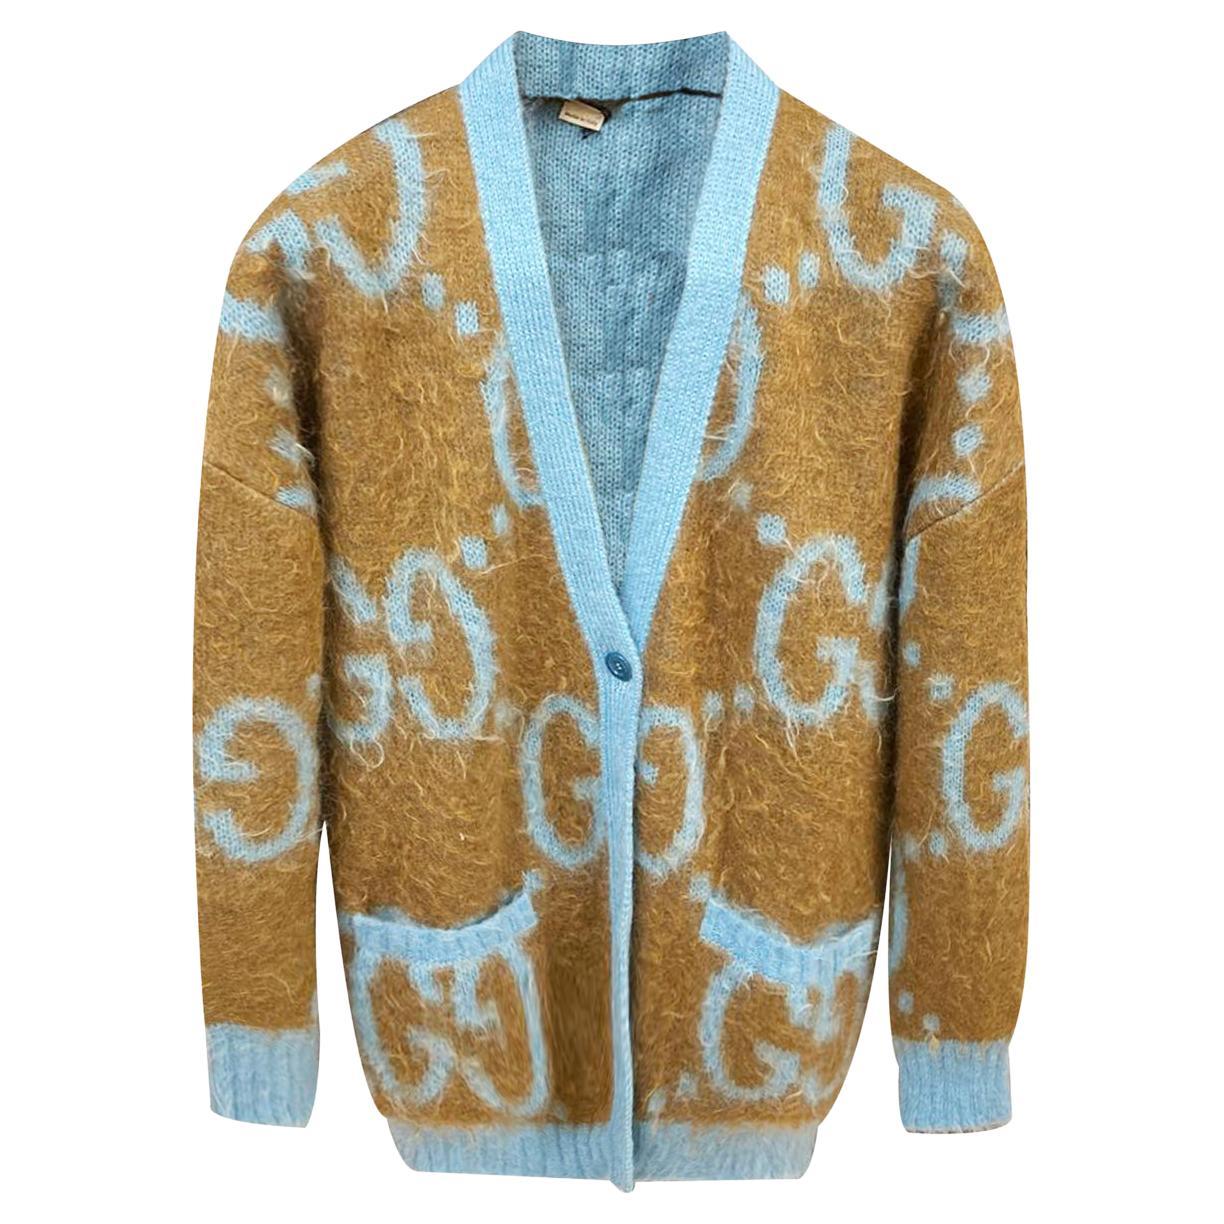 New GUCCI REVERSIBLE KNITTED WOOL CARDIGAN JACKET 40 - S